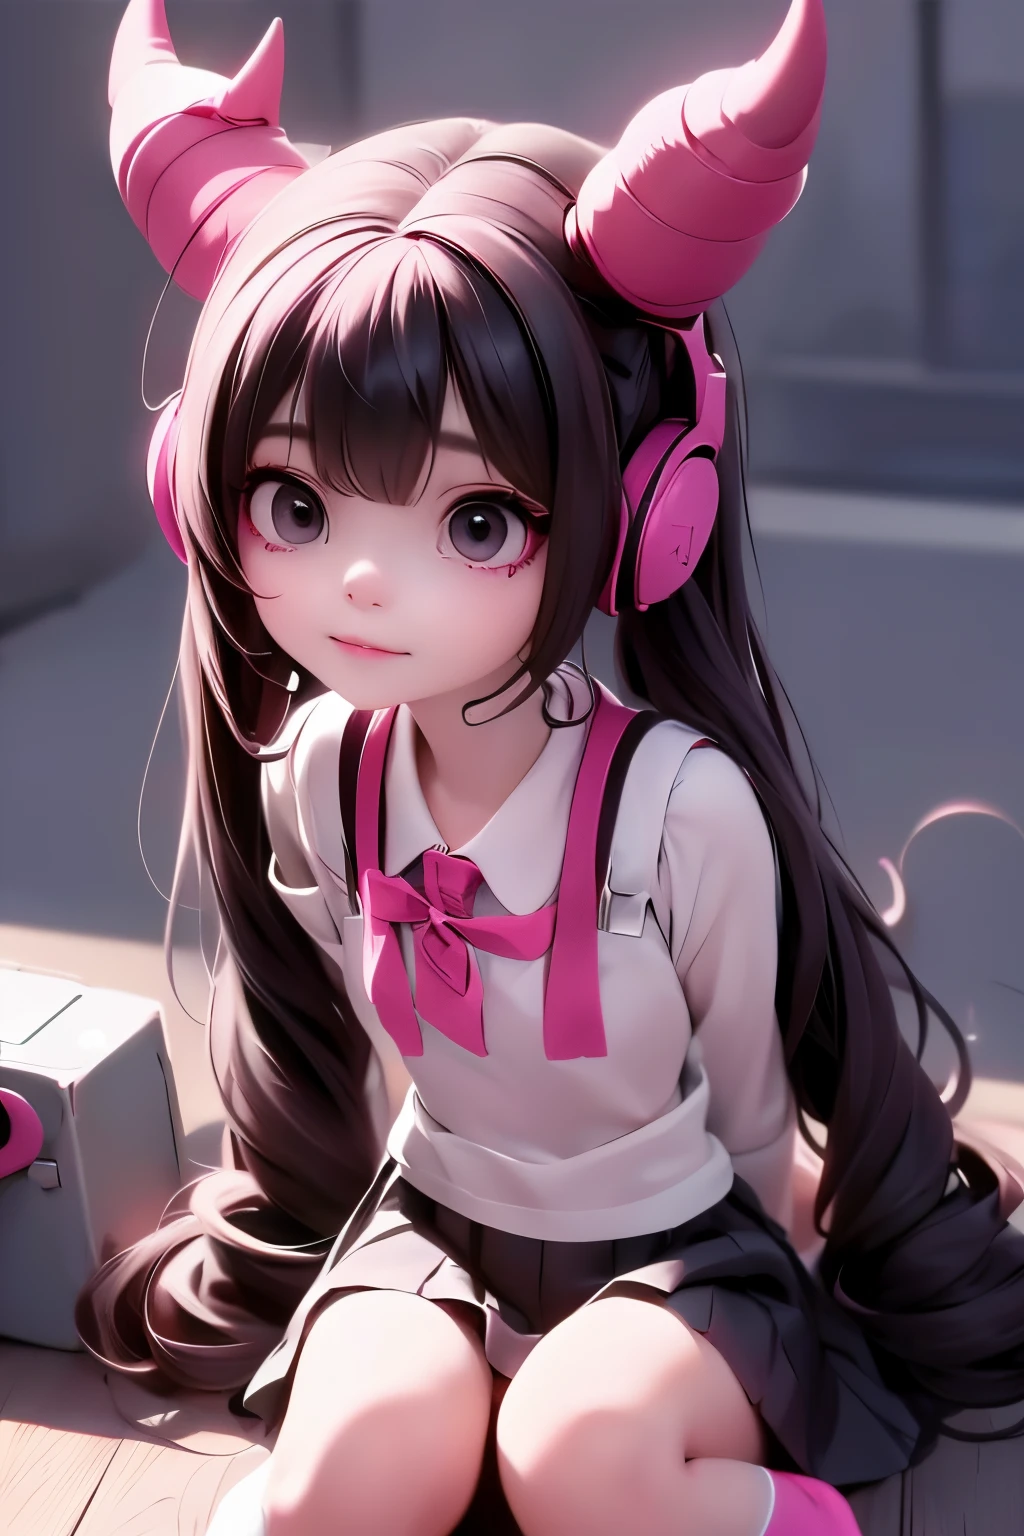 a (horned) demon girl with headphones and a backpack sitting on the ground, anime goth horned demon girl, wearing skirt and crop lace shirt, choke, wearing headphones, ulzzang, sfw